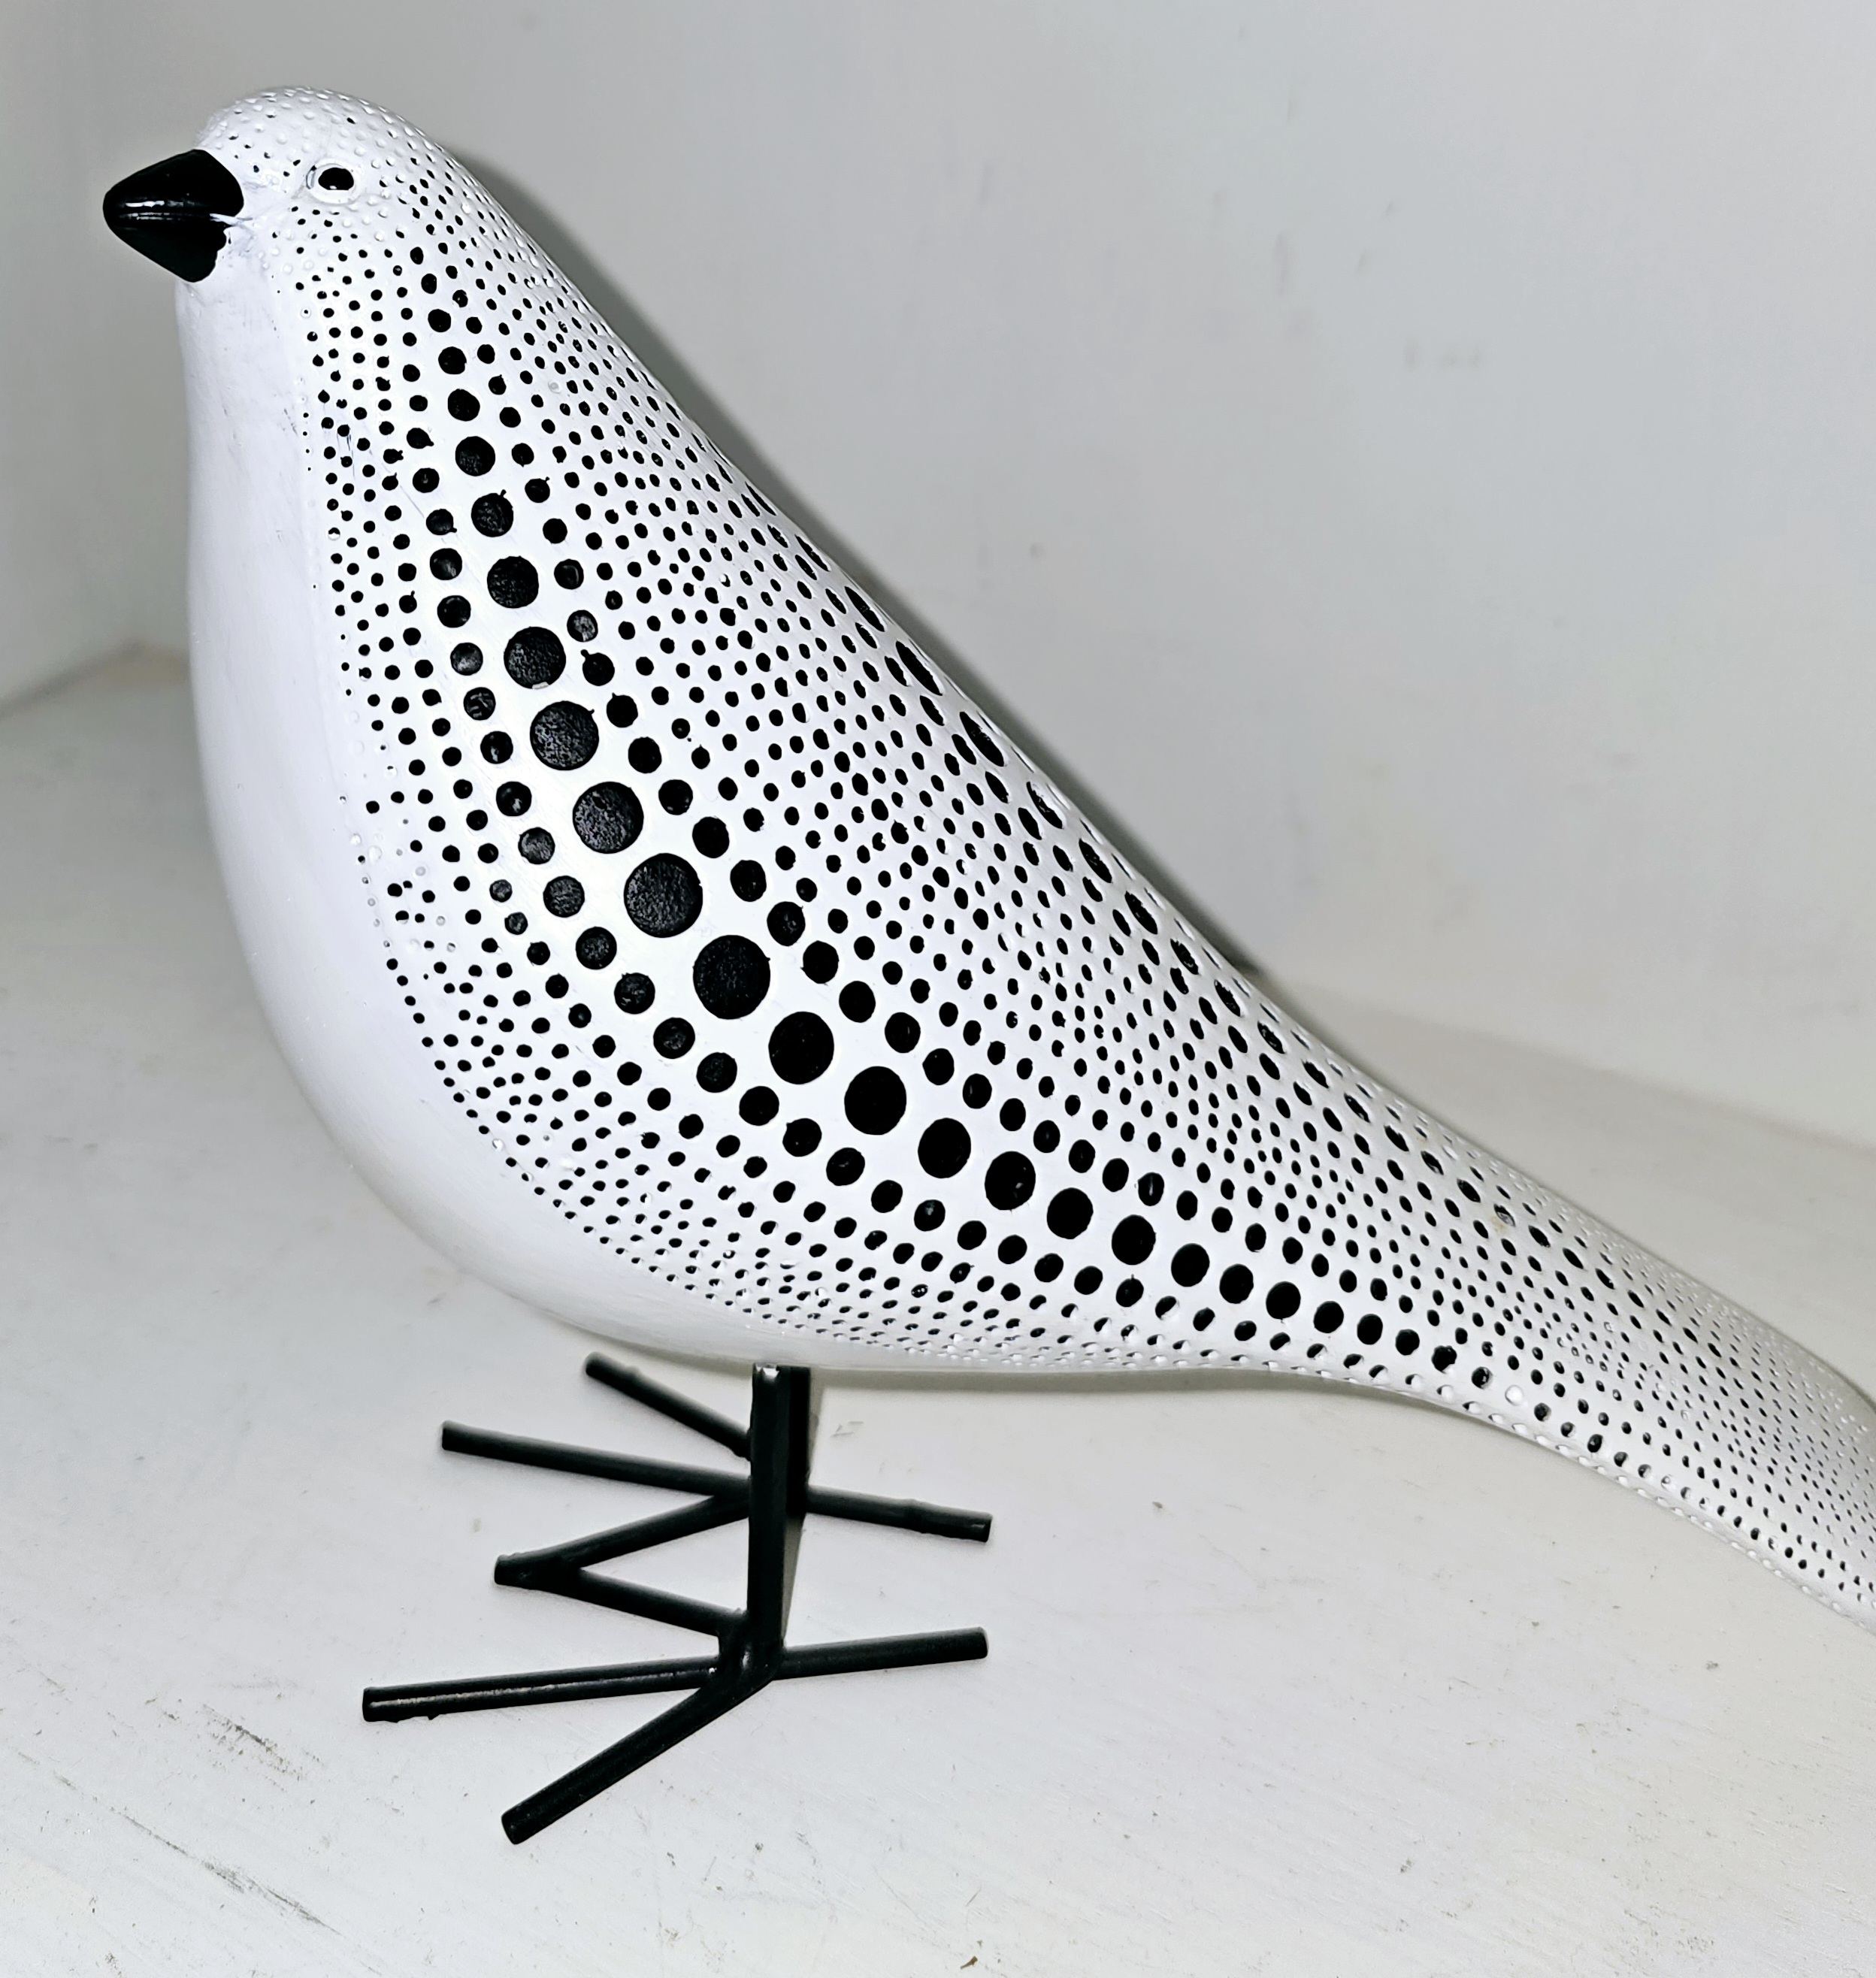 Dotted white and black bird